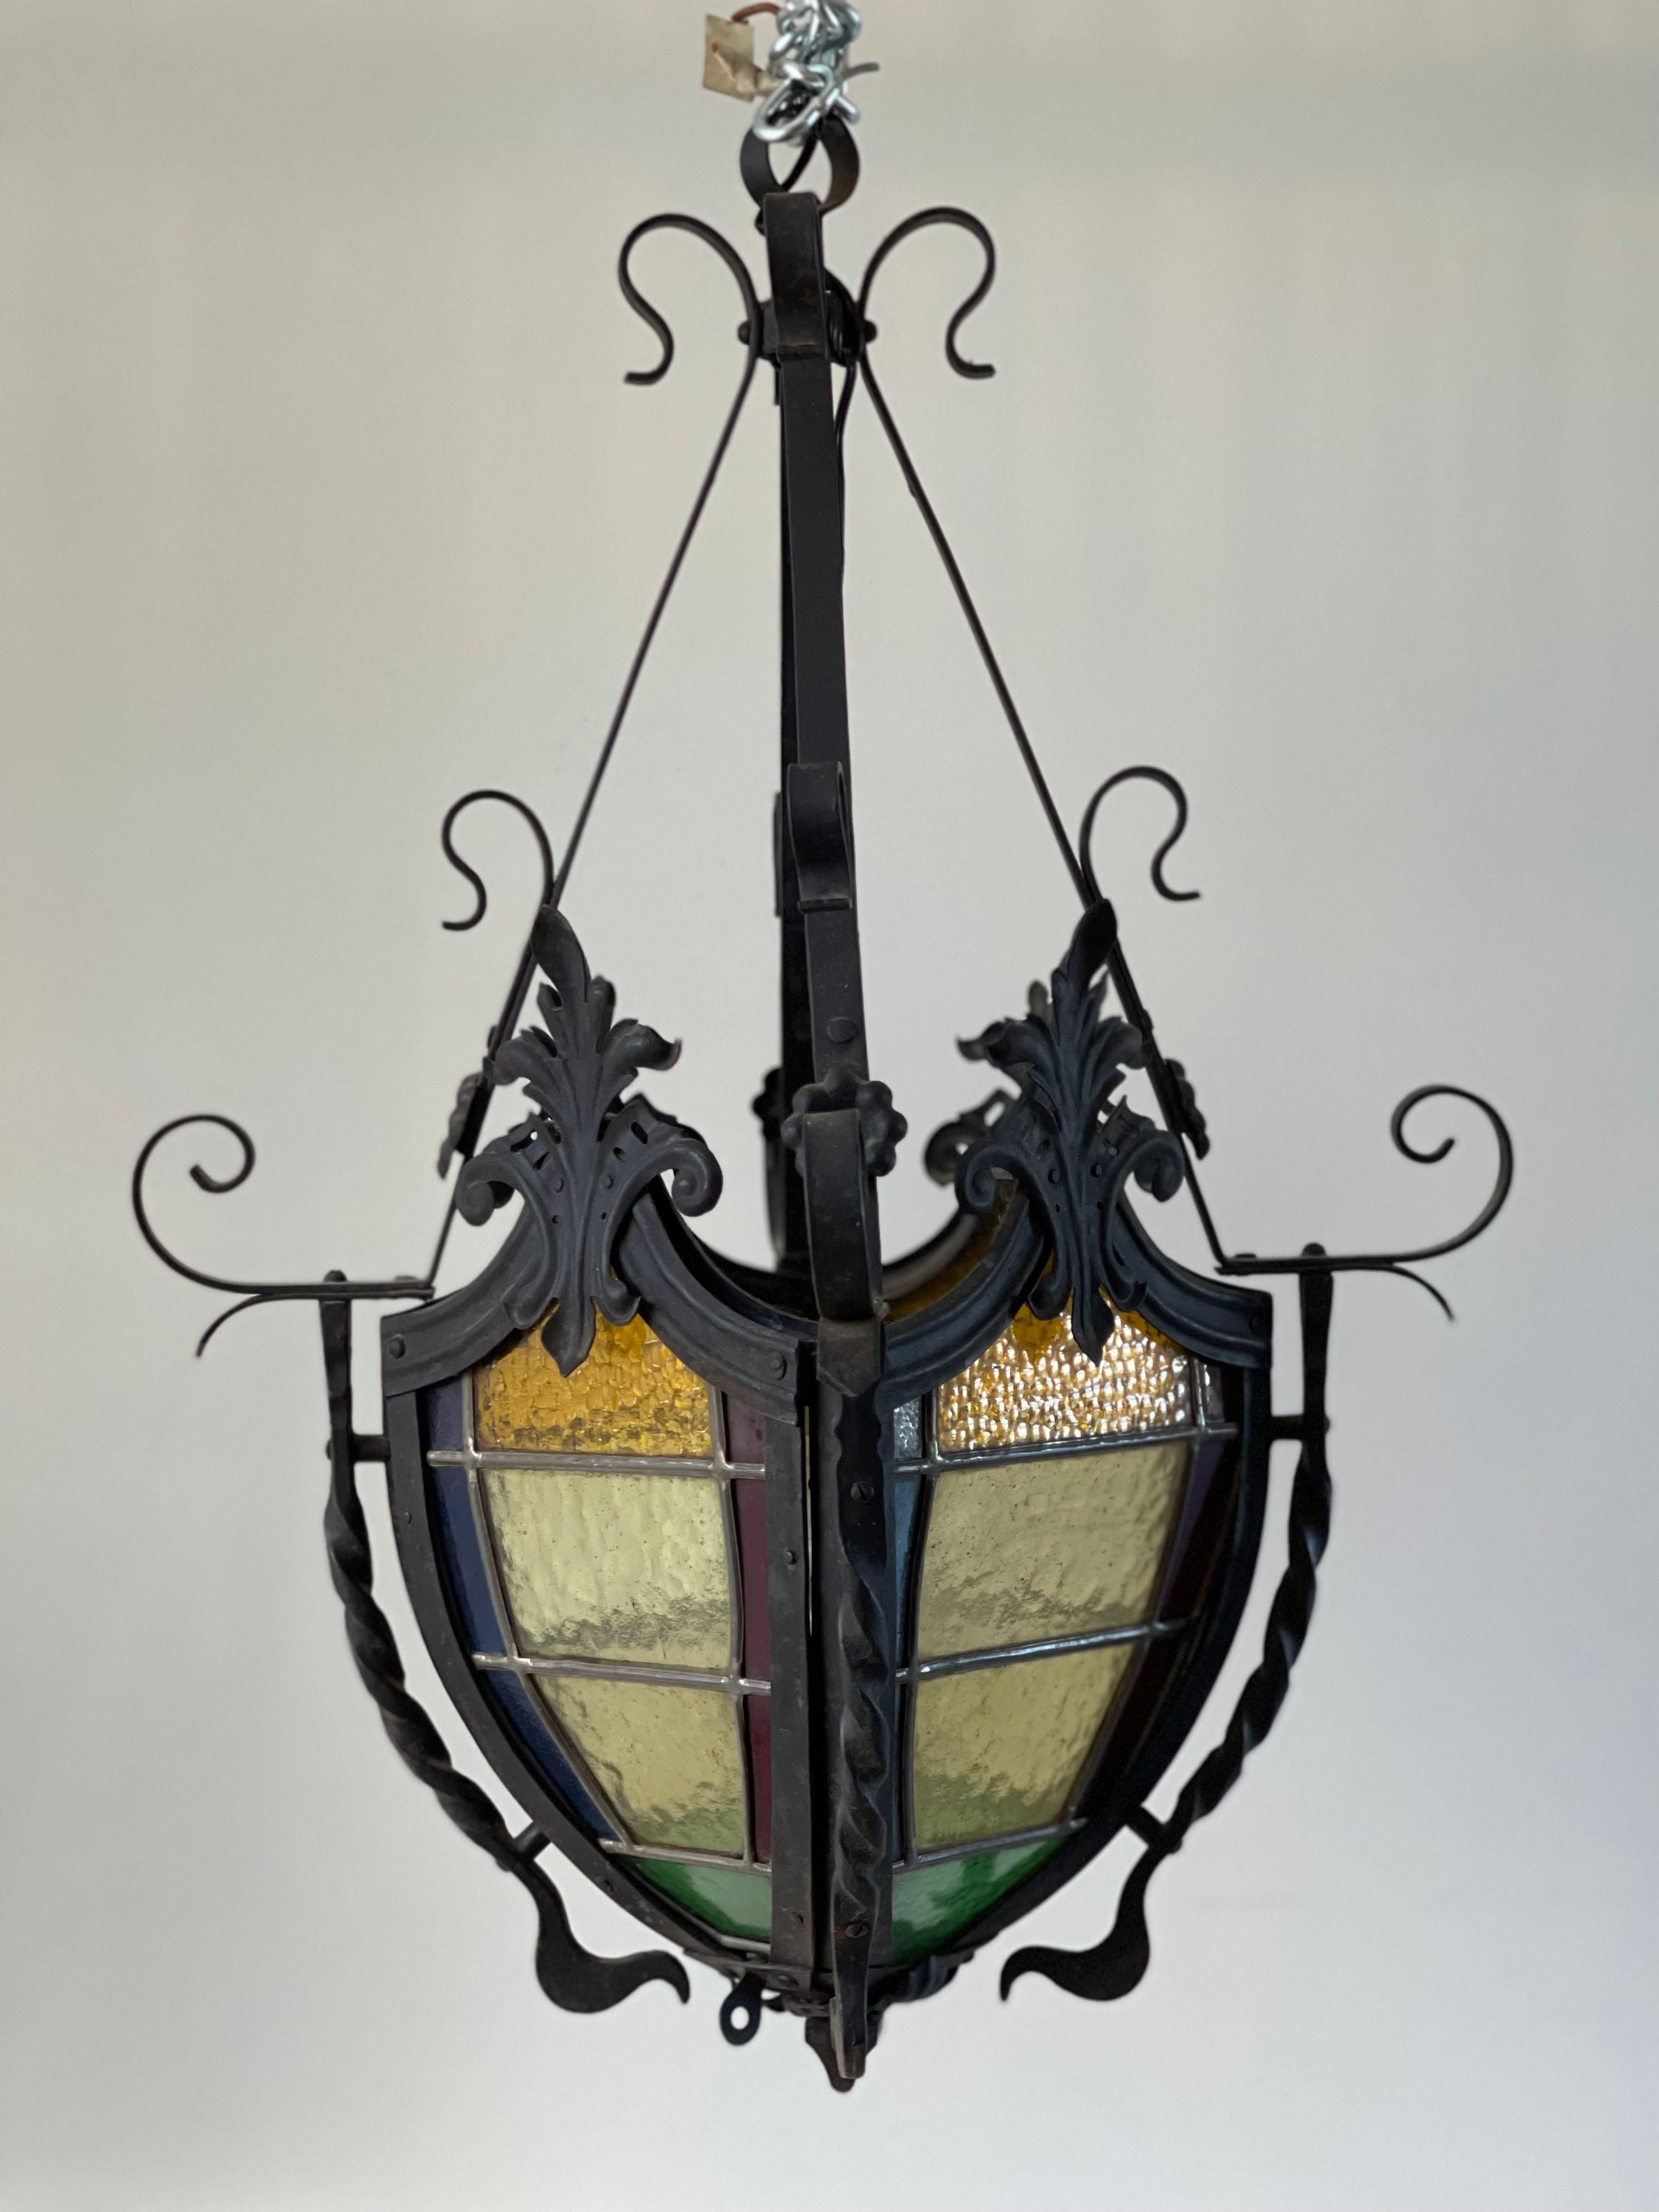 Wrought iron lantern with four faces in stained glass.